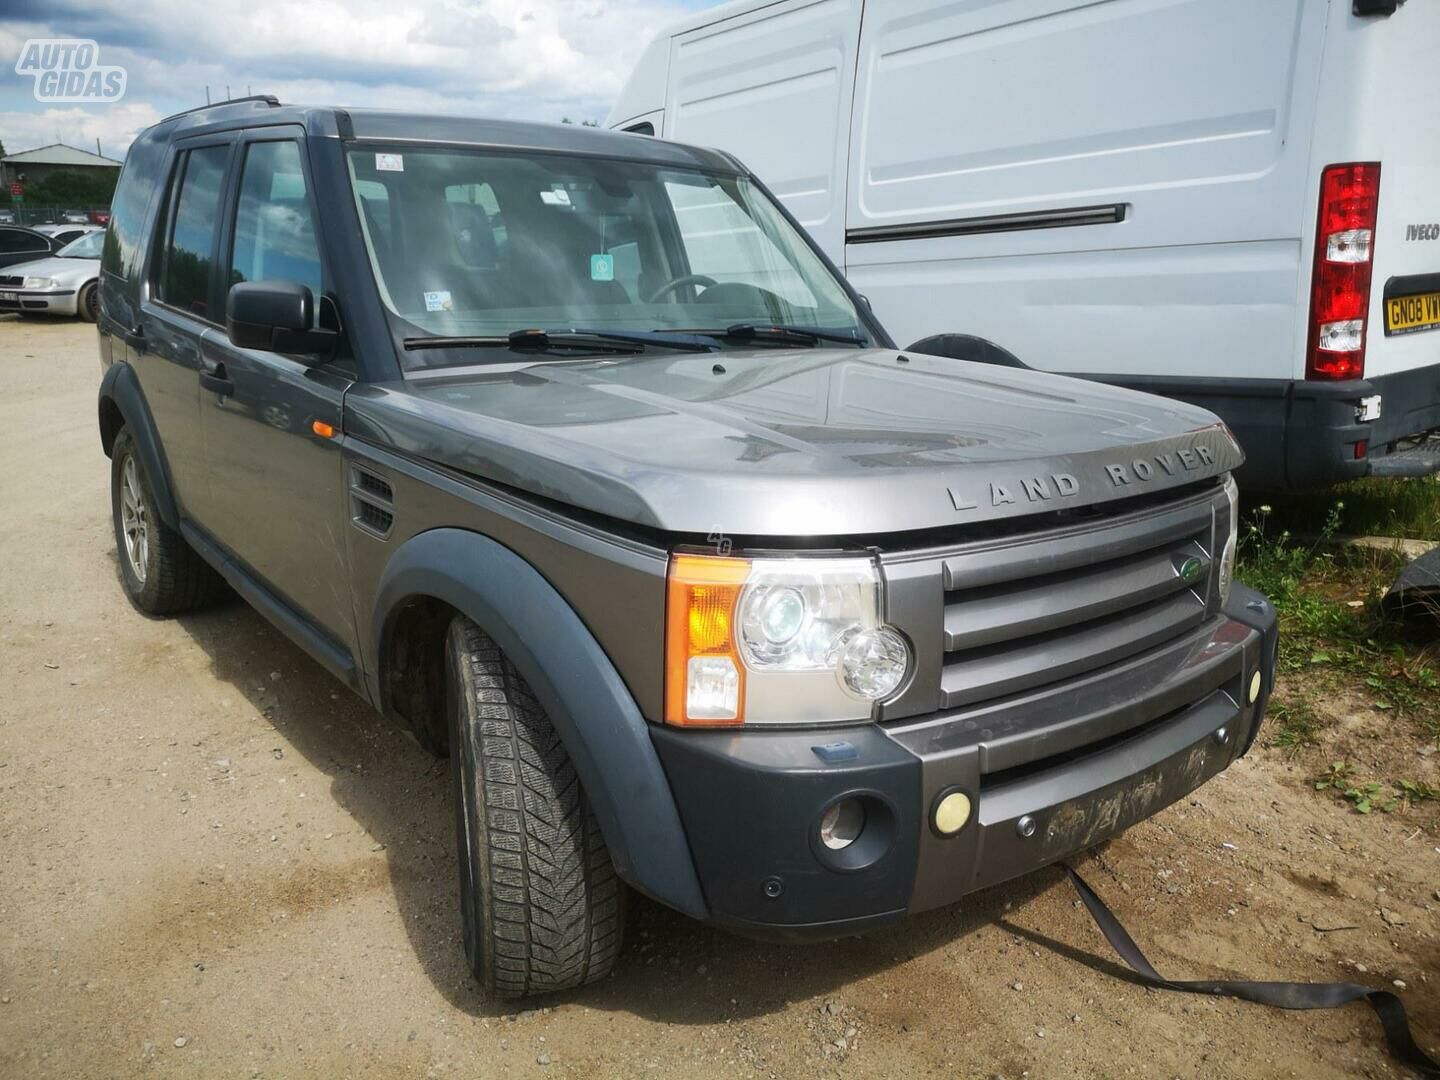 Land-Rover Discovery 2008 г запчясти